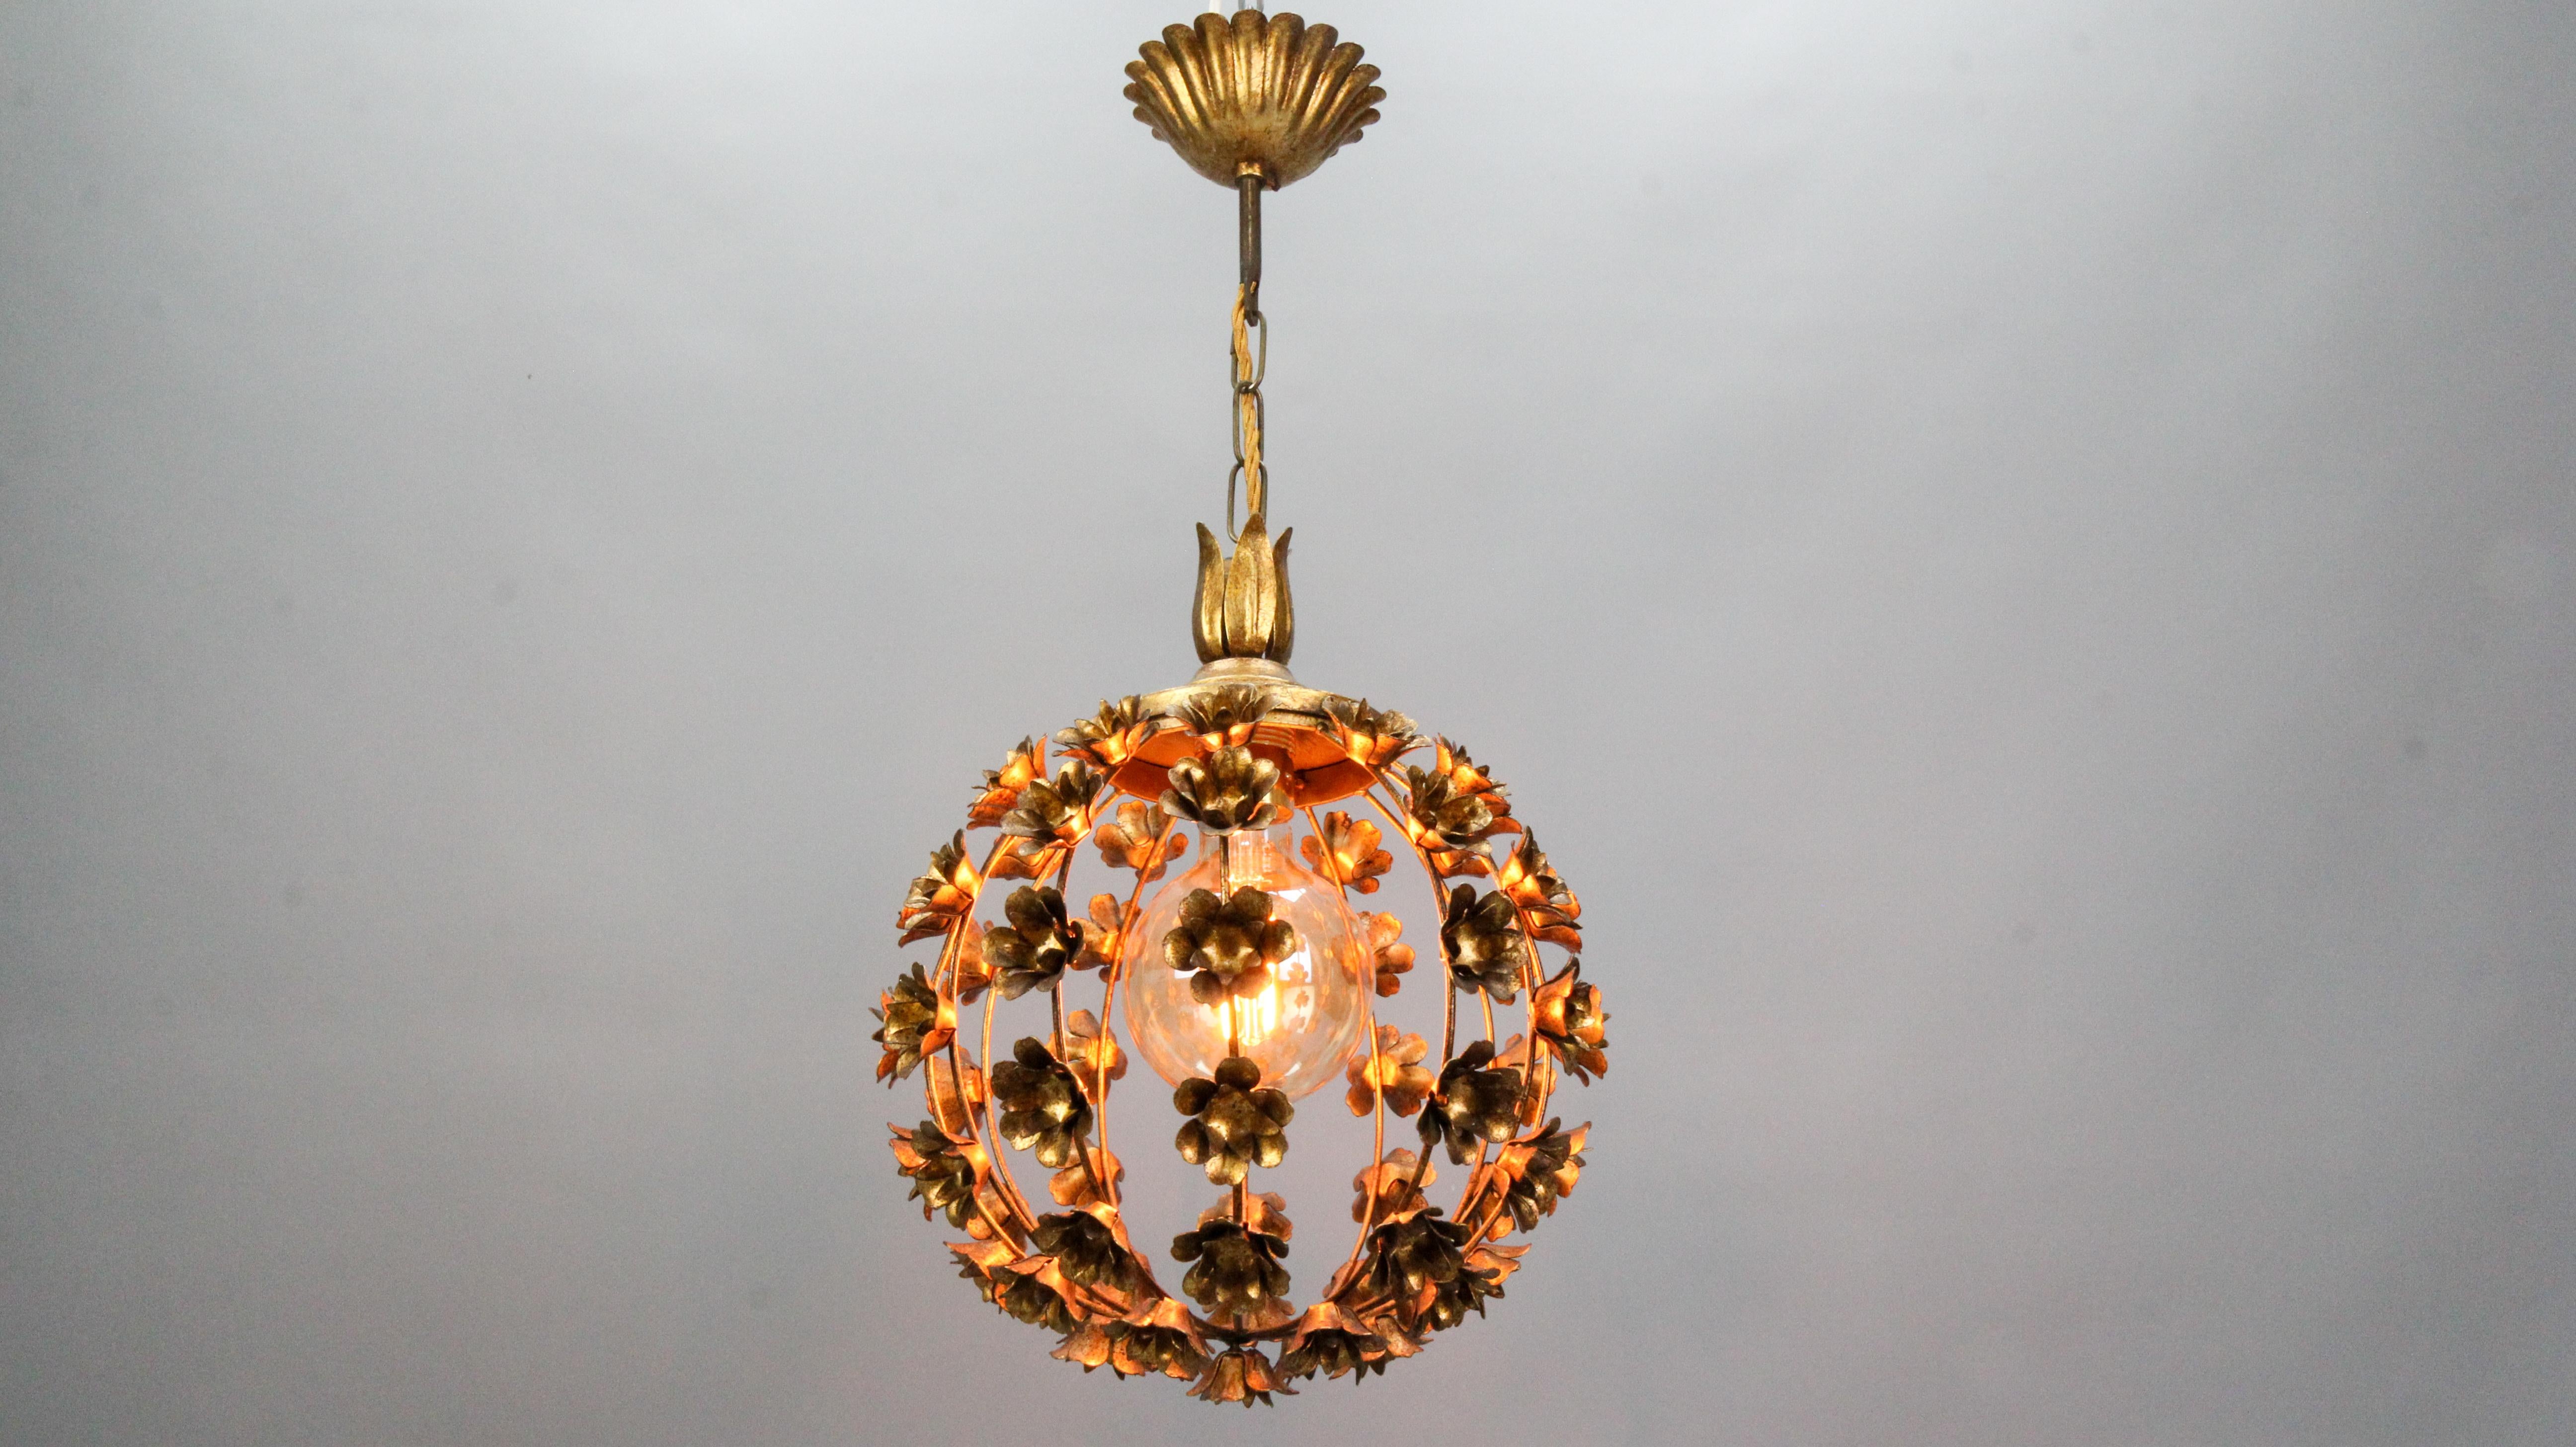 Hollywood Regency style gilt metal floral spheric pendant light, Italy, circa the 1970s.
This beautiful gilt metal pendant chandelier features a sphere-shaped frame decorated with flowers that surround the single light with a new socket for an E-27